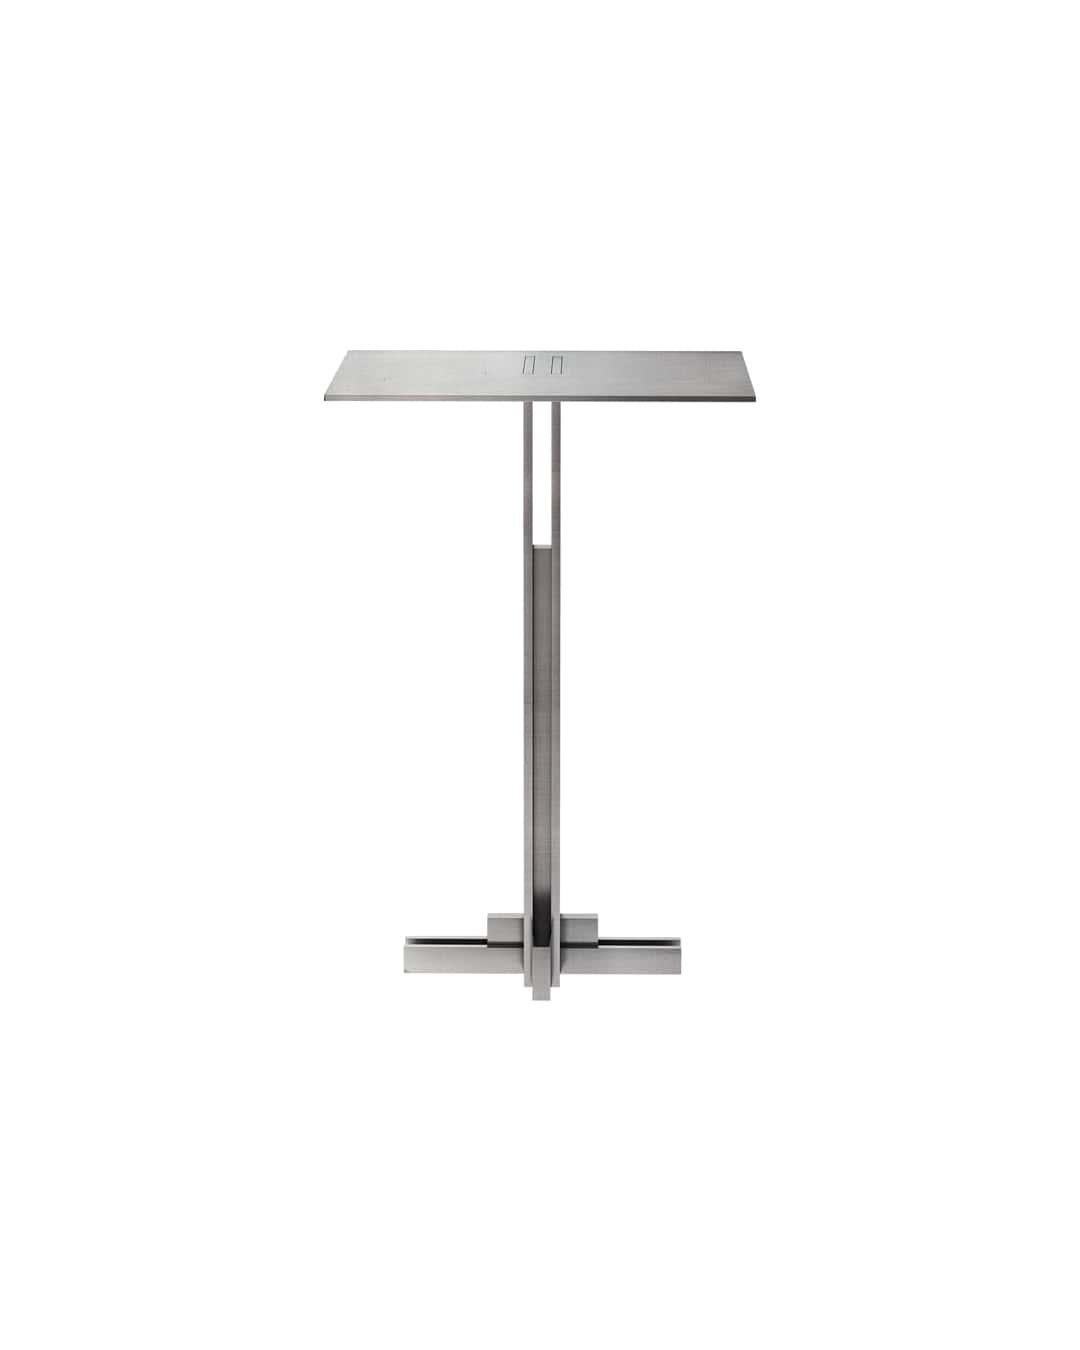 Hand-Crafted Apex Side Table, Handmade Metal, Modern Look, Stainless Steel For Sale